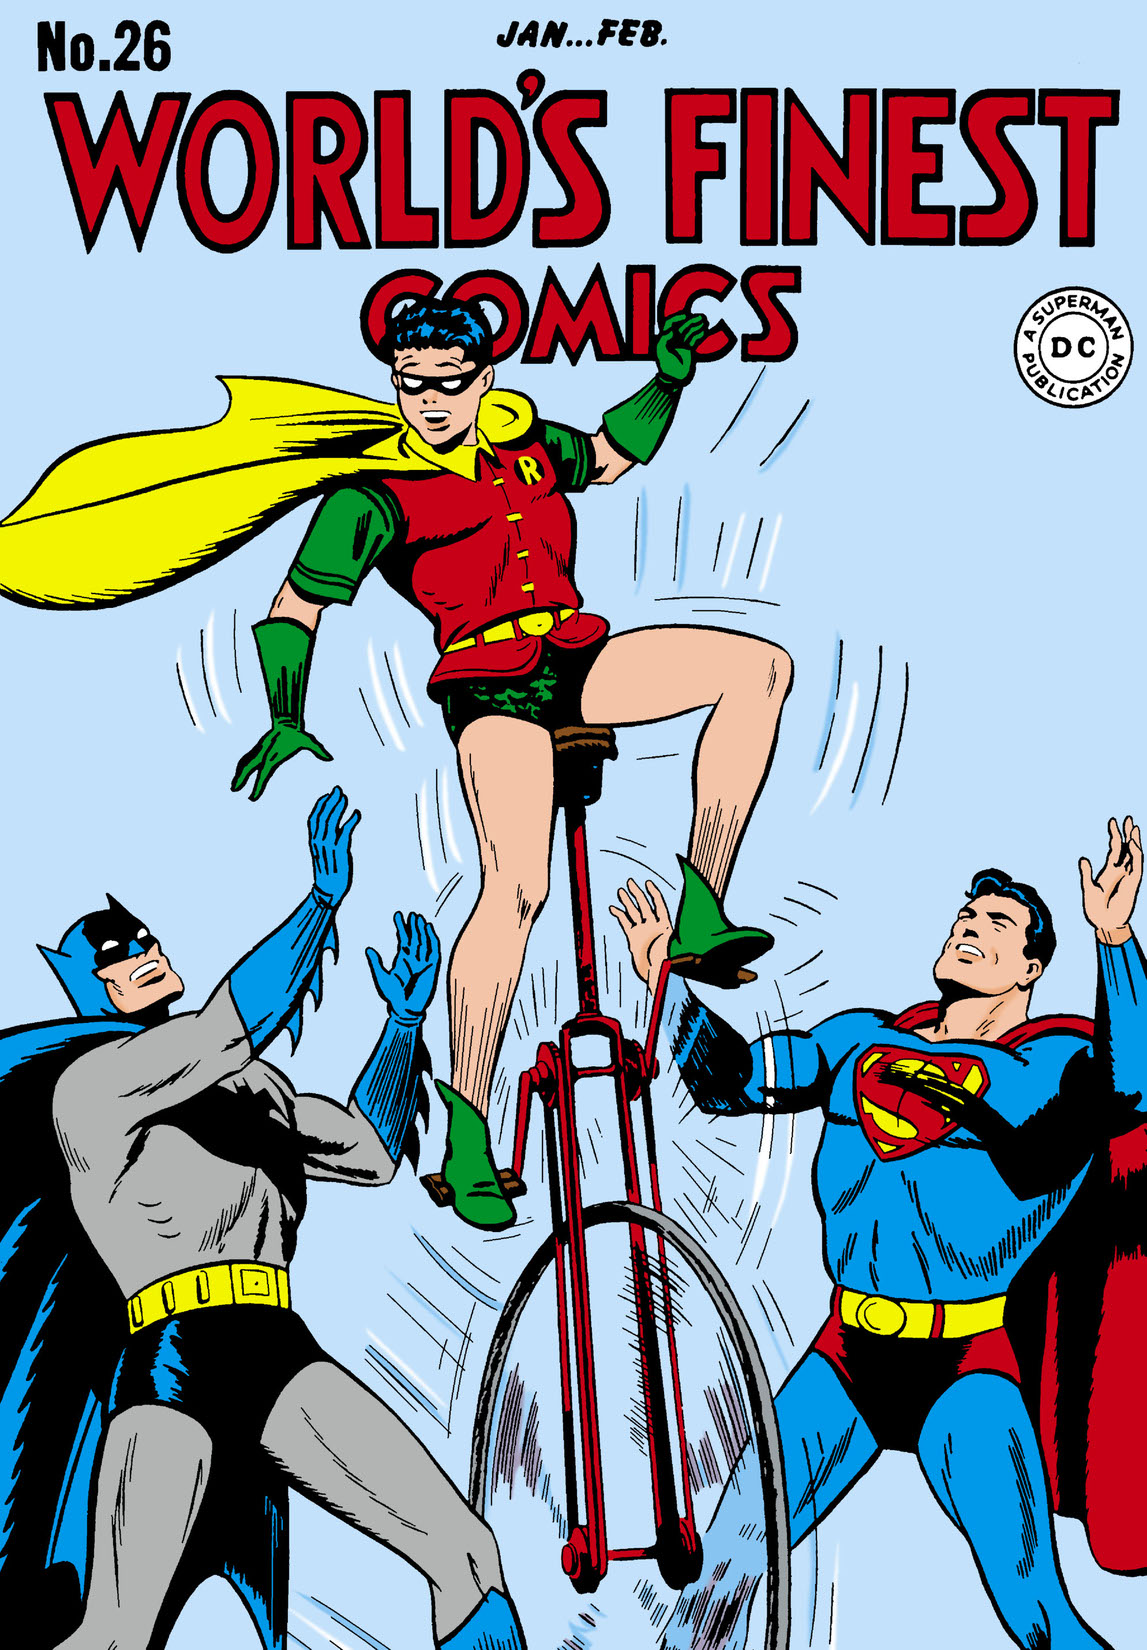 World's Finest Comics (1941-) #26 preview images